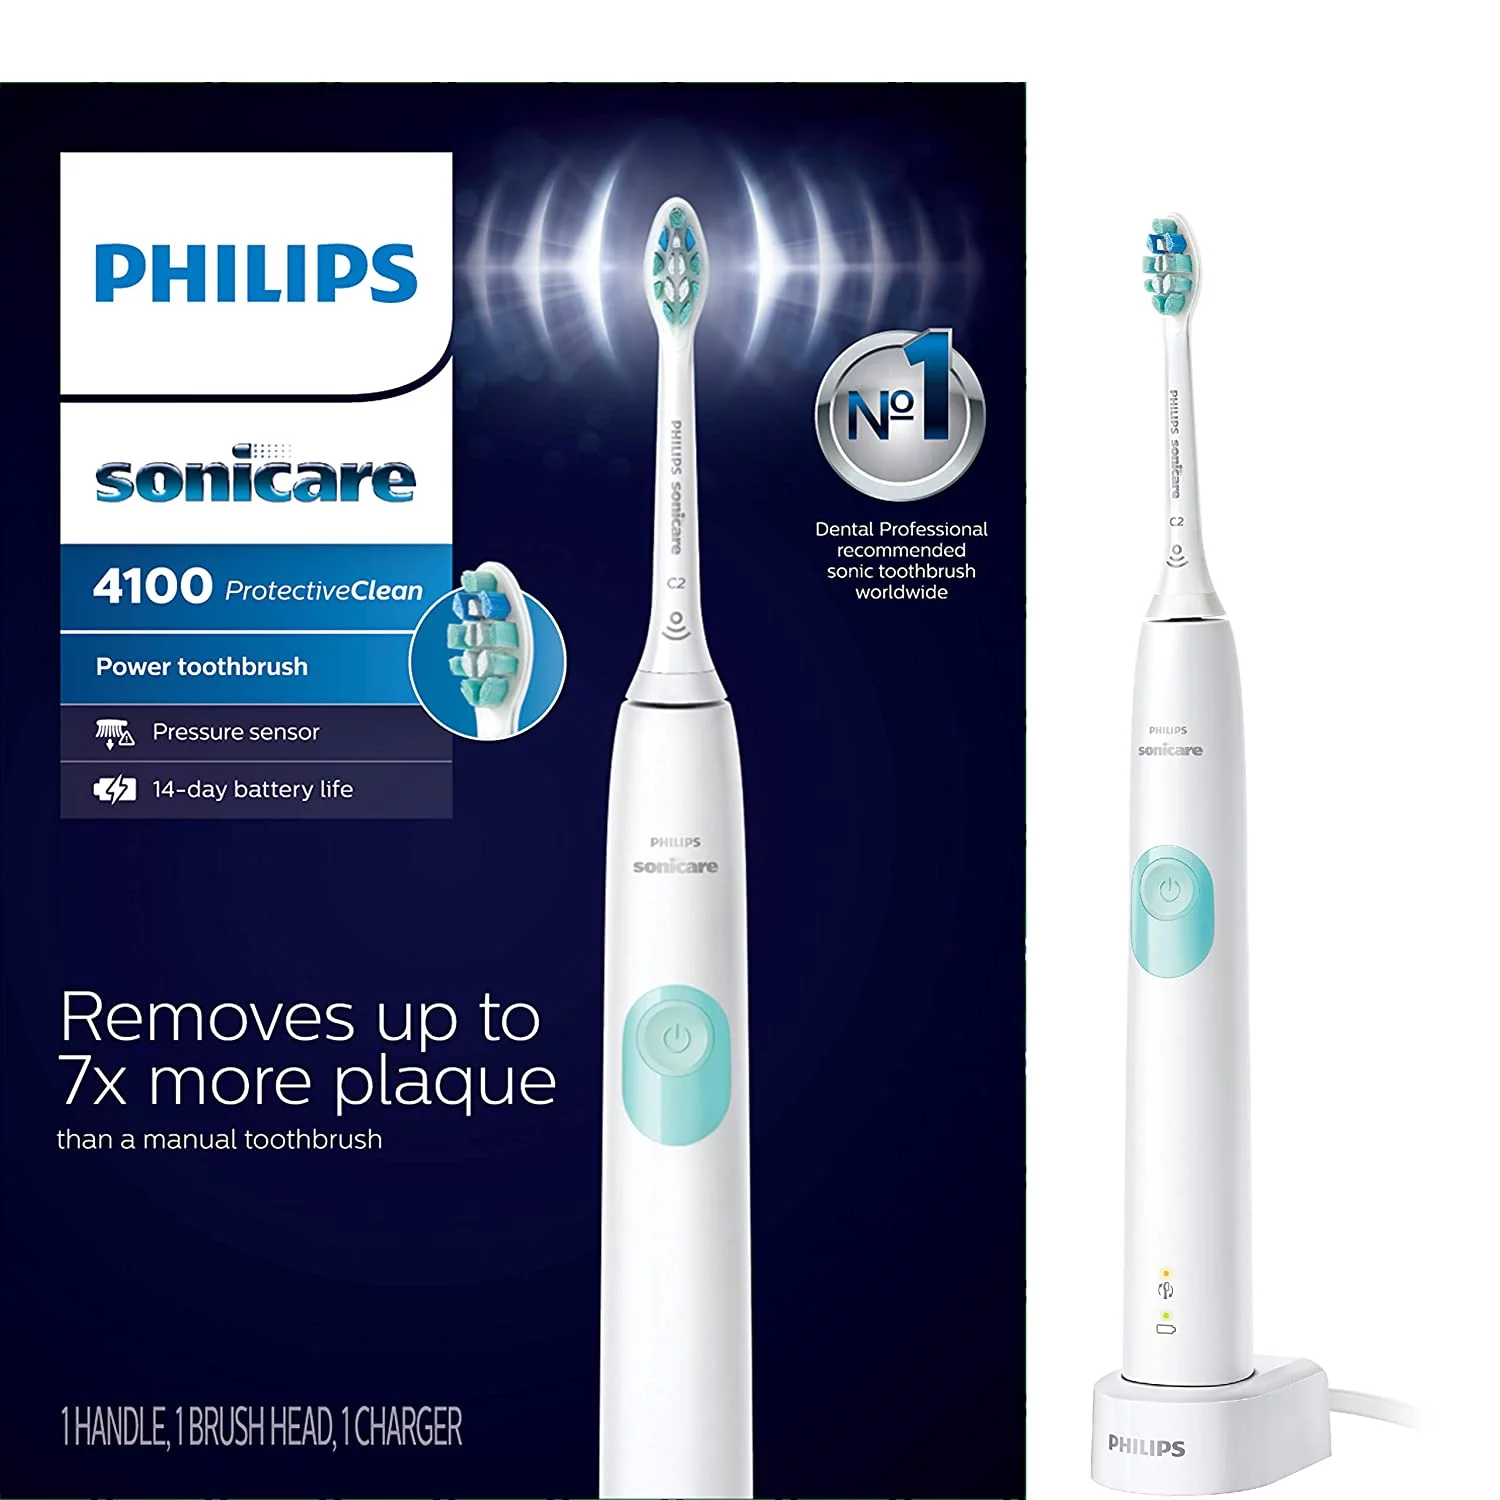 Best-Rated Electric Toothbrush